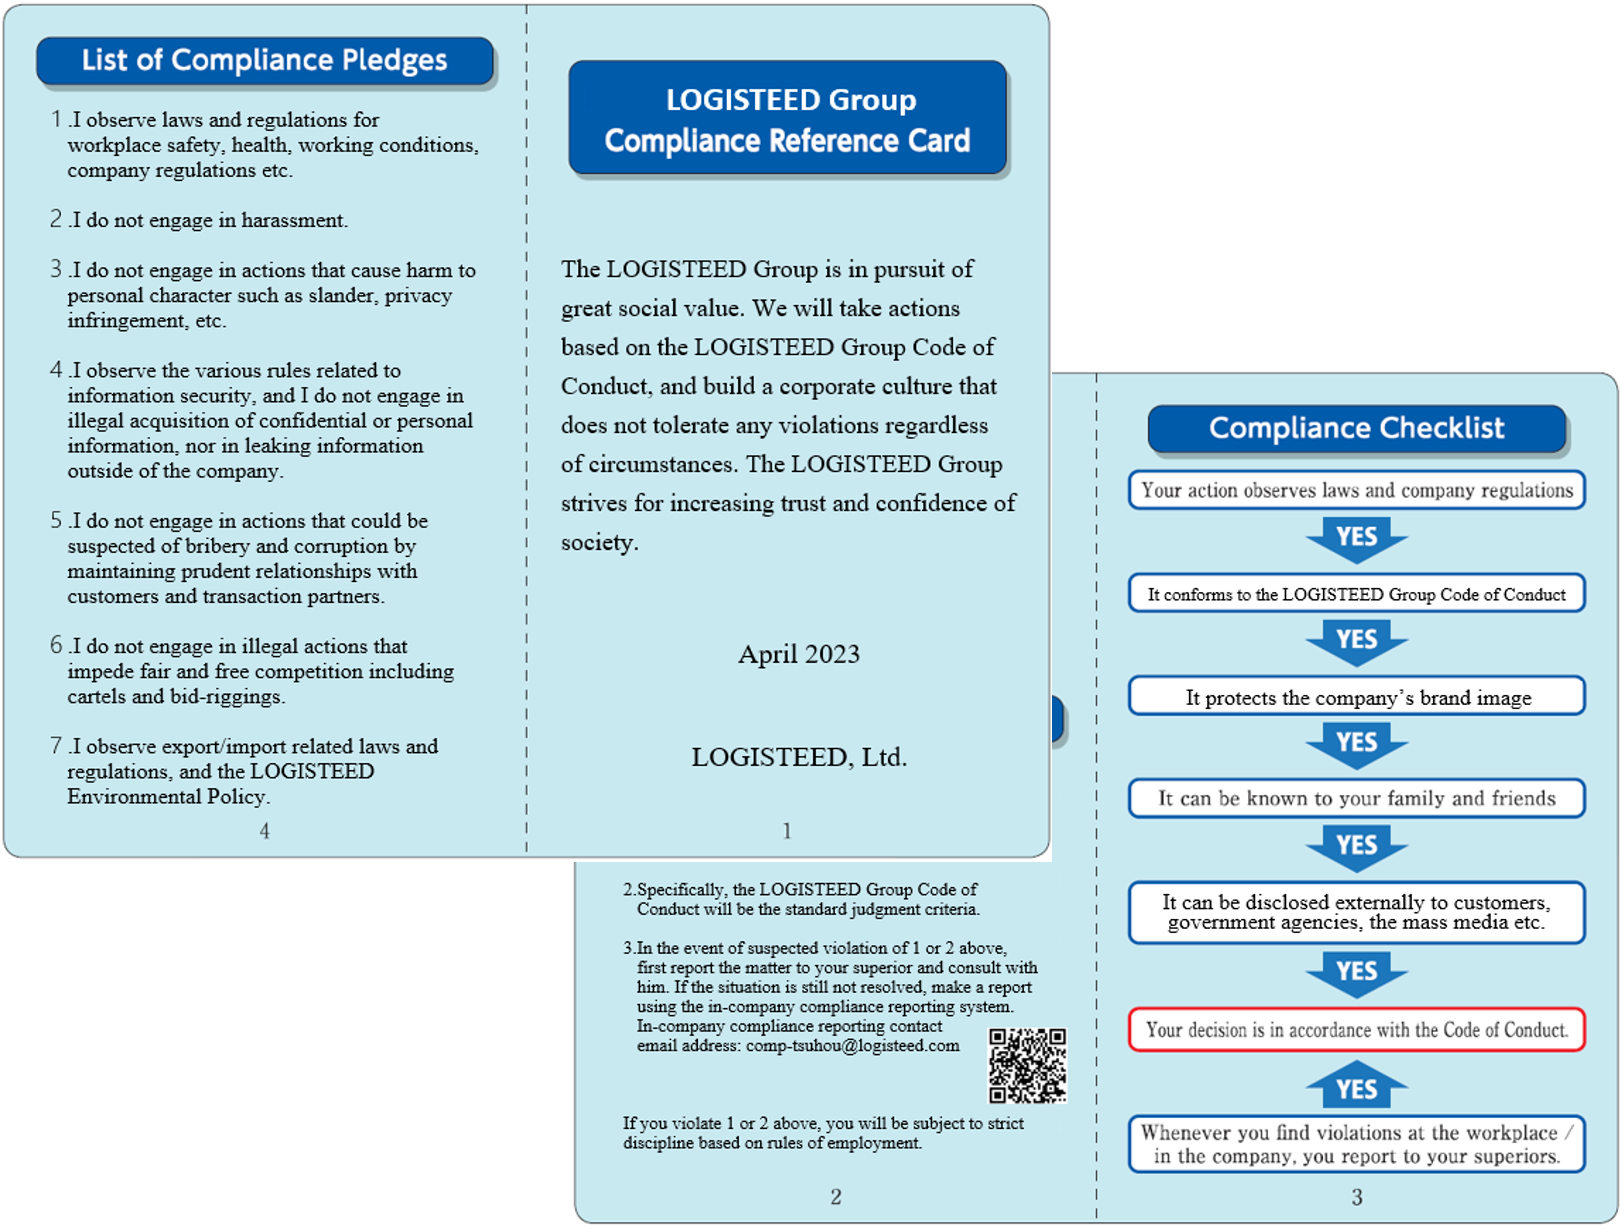 Group compliance reference card